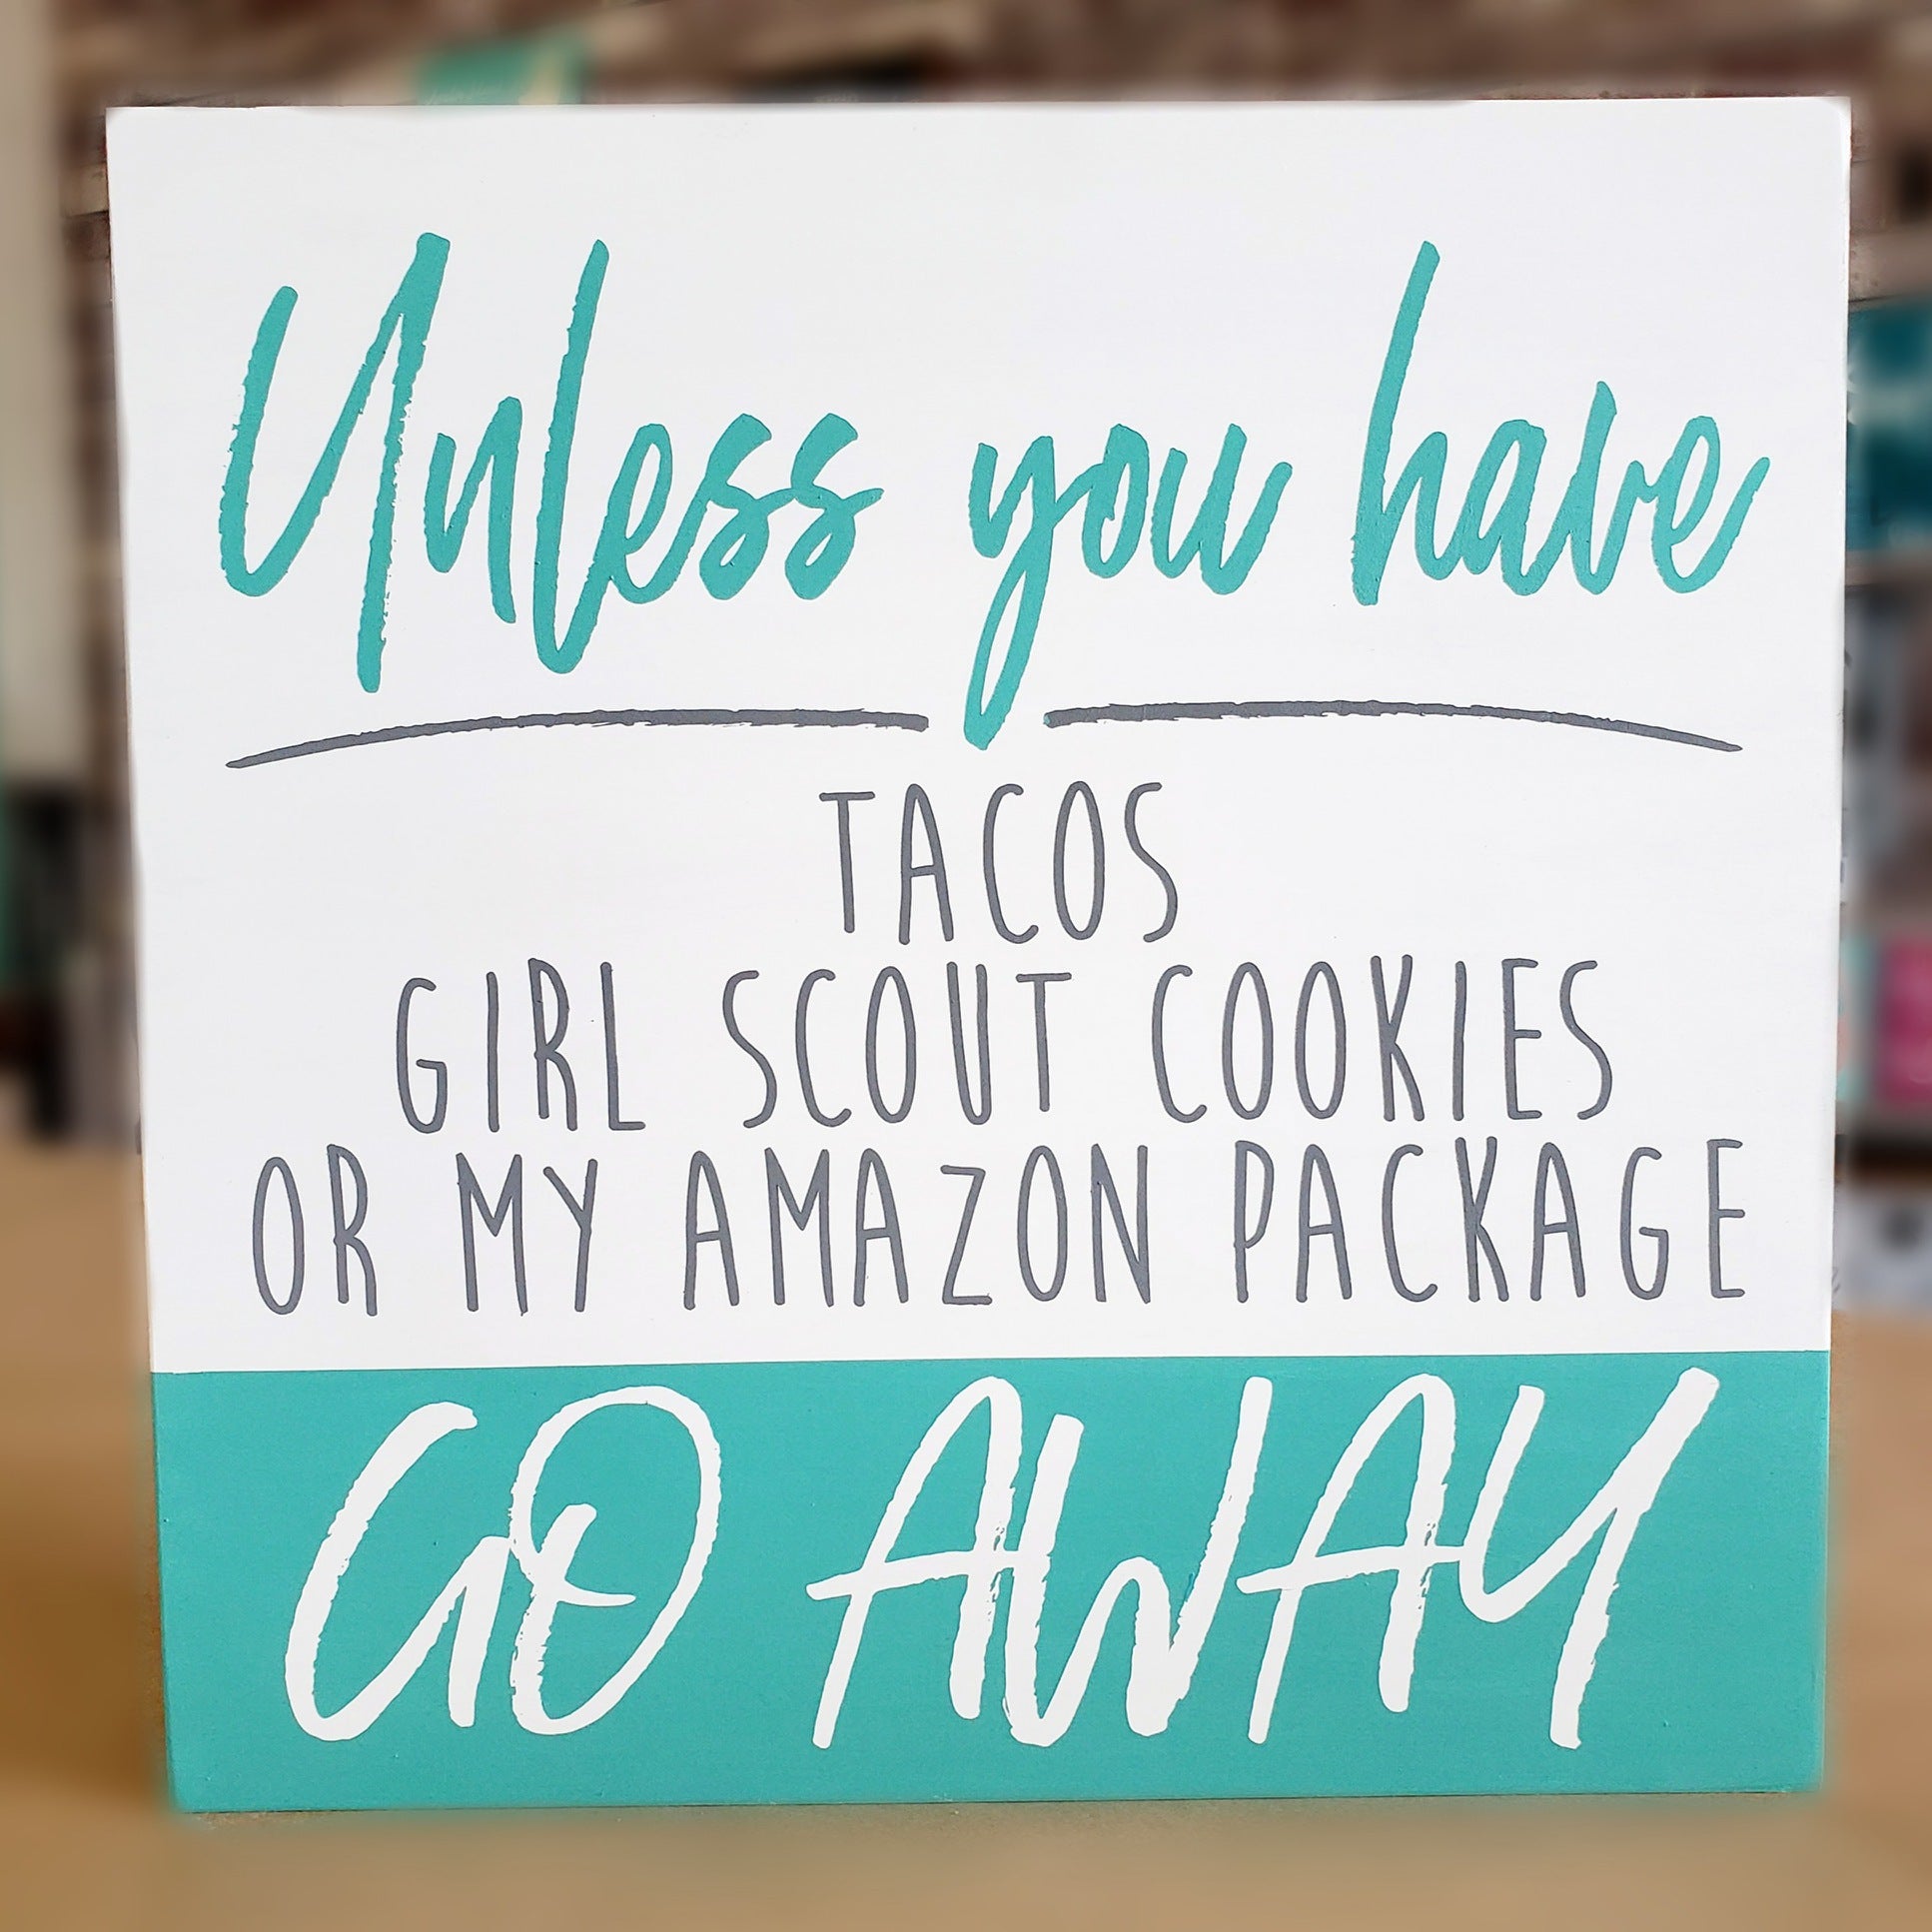 Unless you have Tacos, Girl Scout Cookies or my Amazon Package GO AWAY : SQUARE DESIGN - Paisley Grace Makery